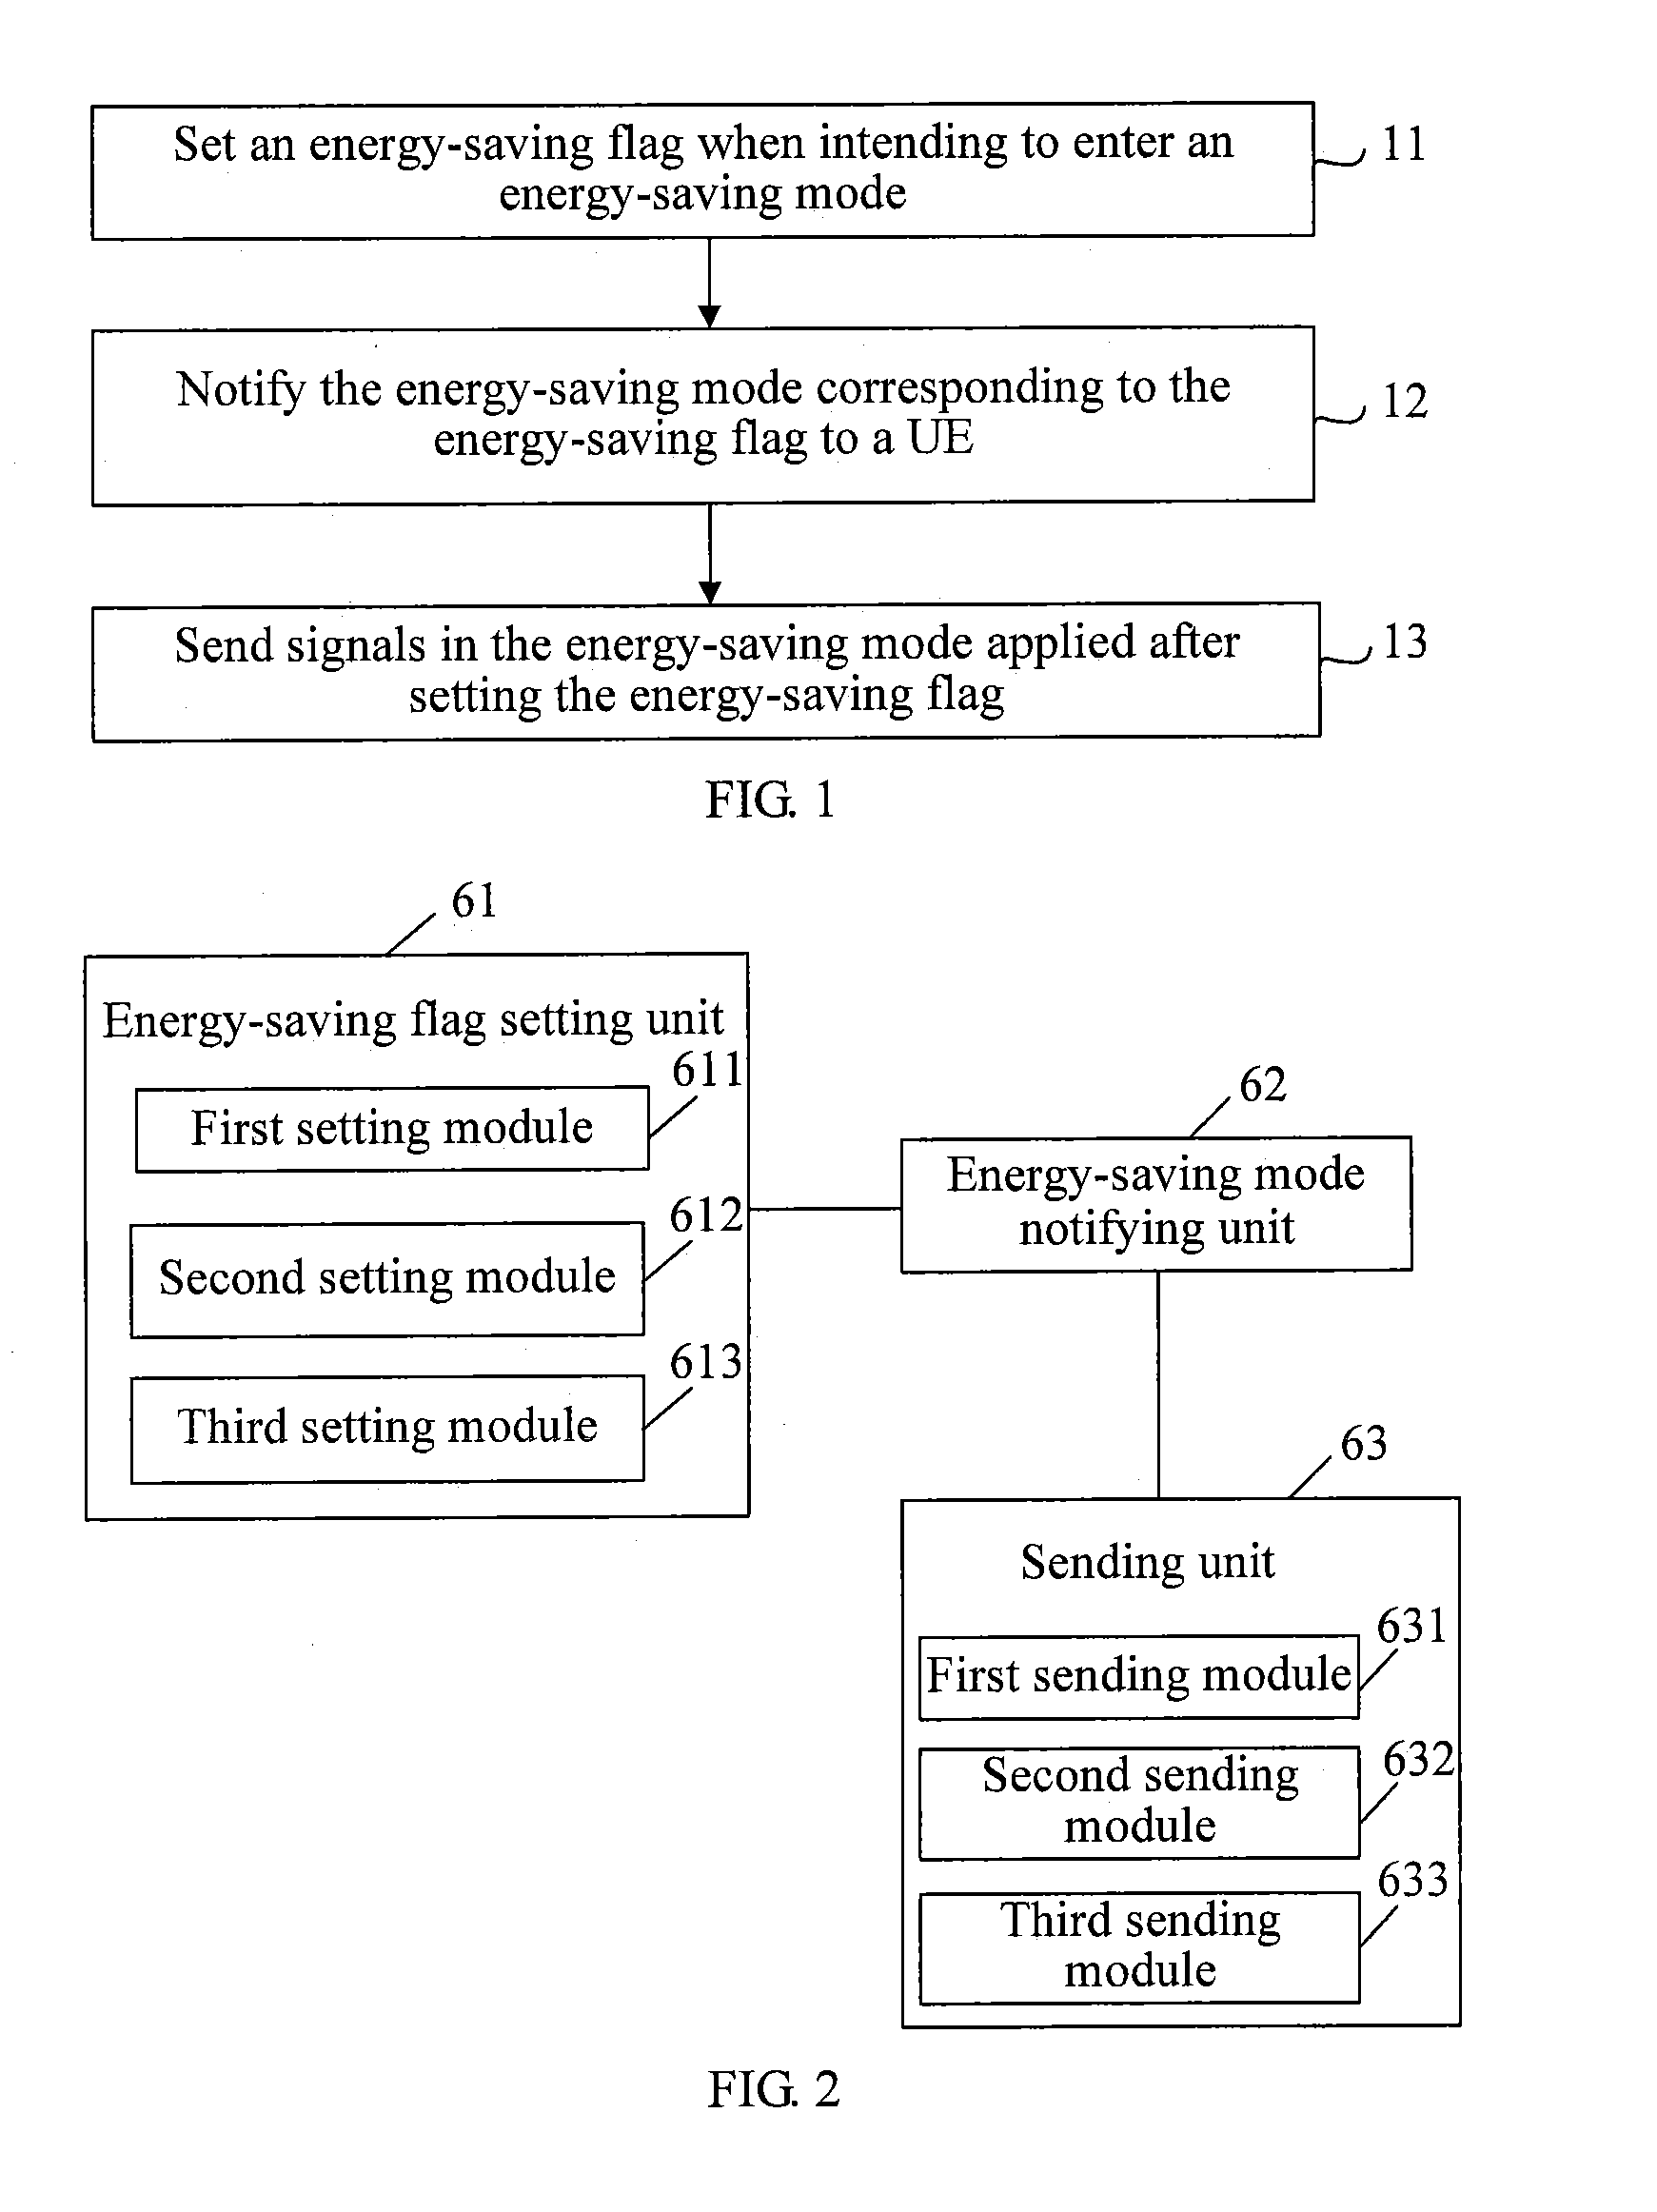 Method for sending signals from base station and energy-saving base station